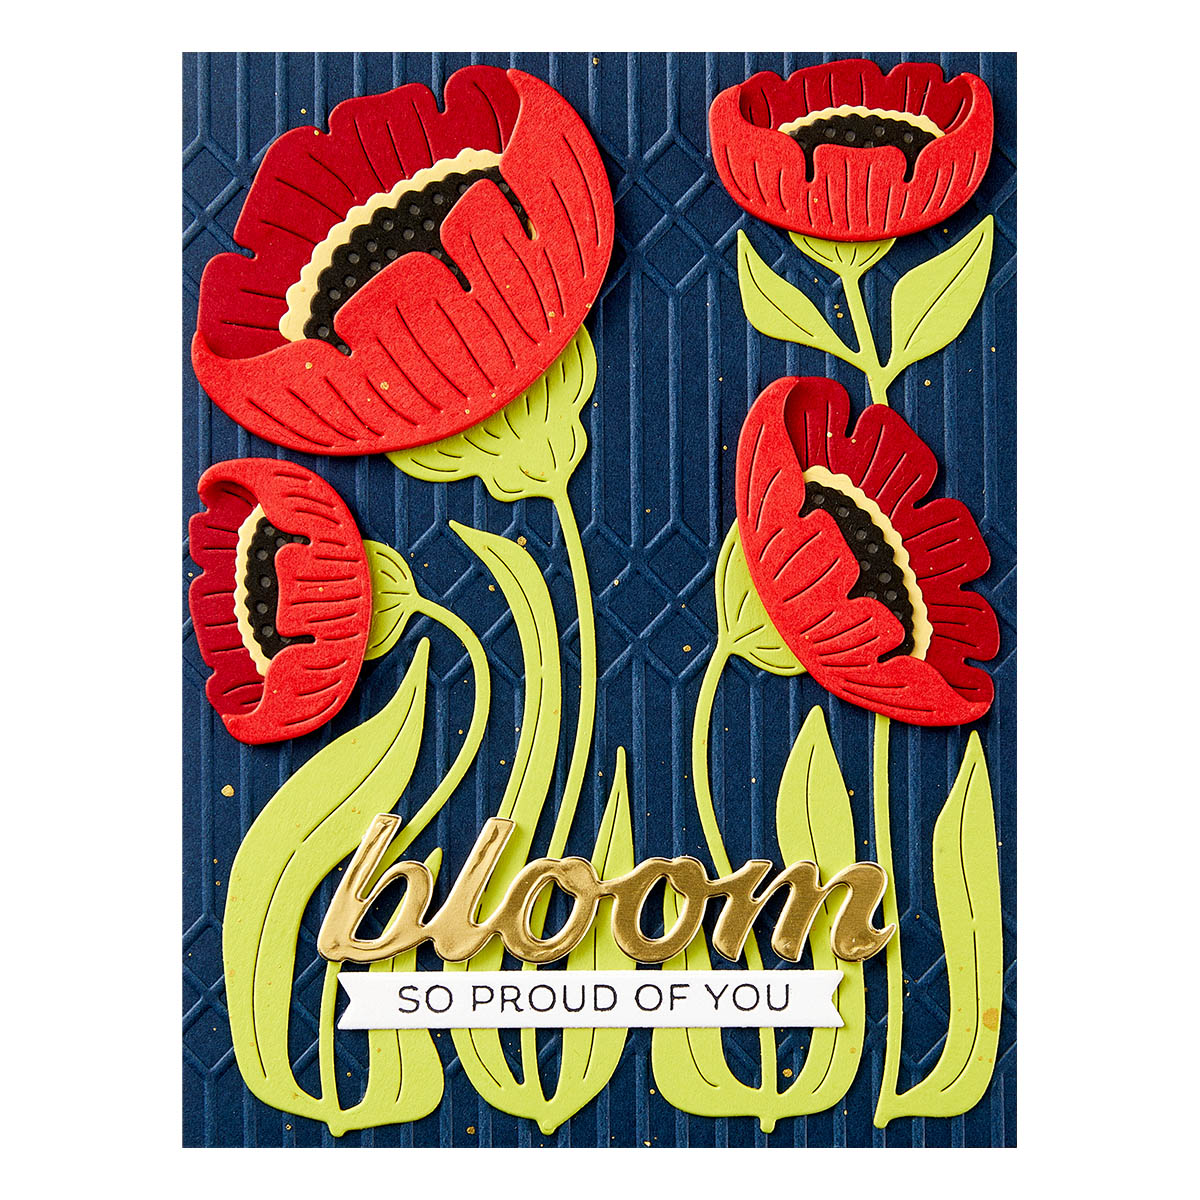 Spellbinders Fresh Picked Anemones Etched Dies From the Fresh Picked Collection